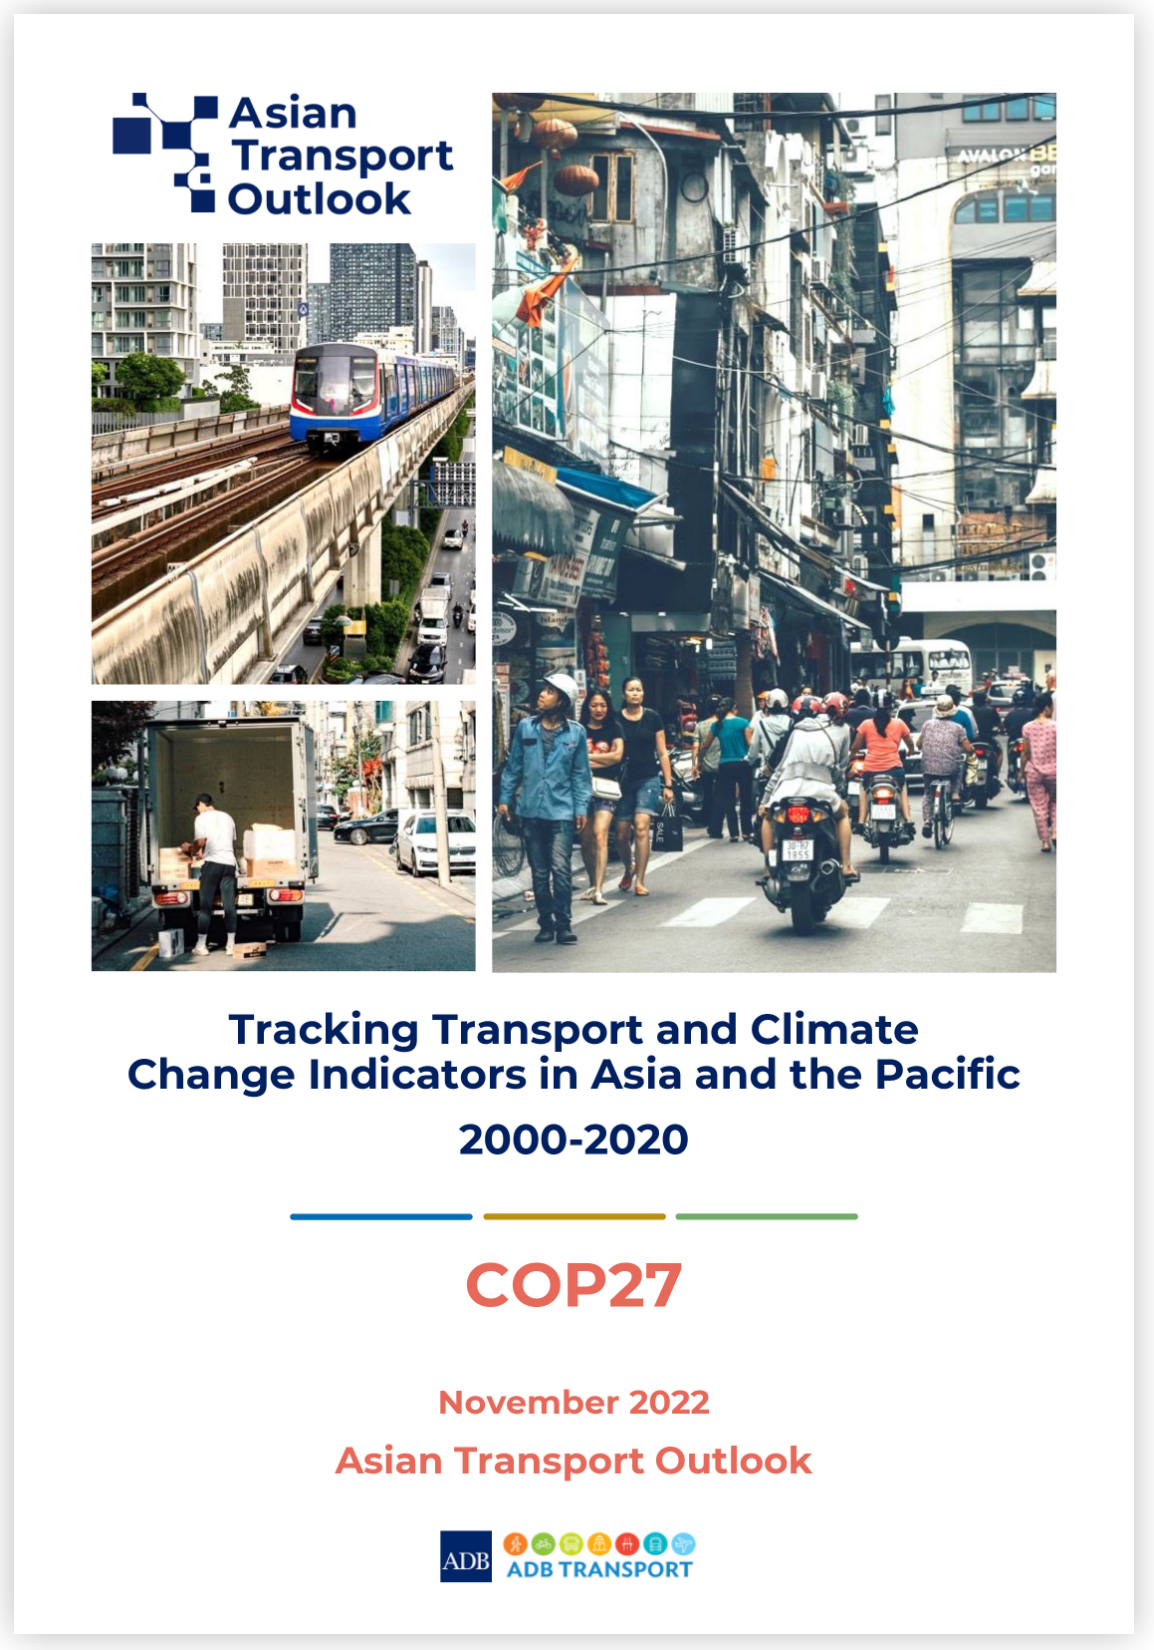 Transport and Climate Change Indicators